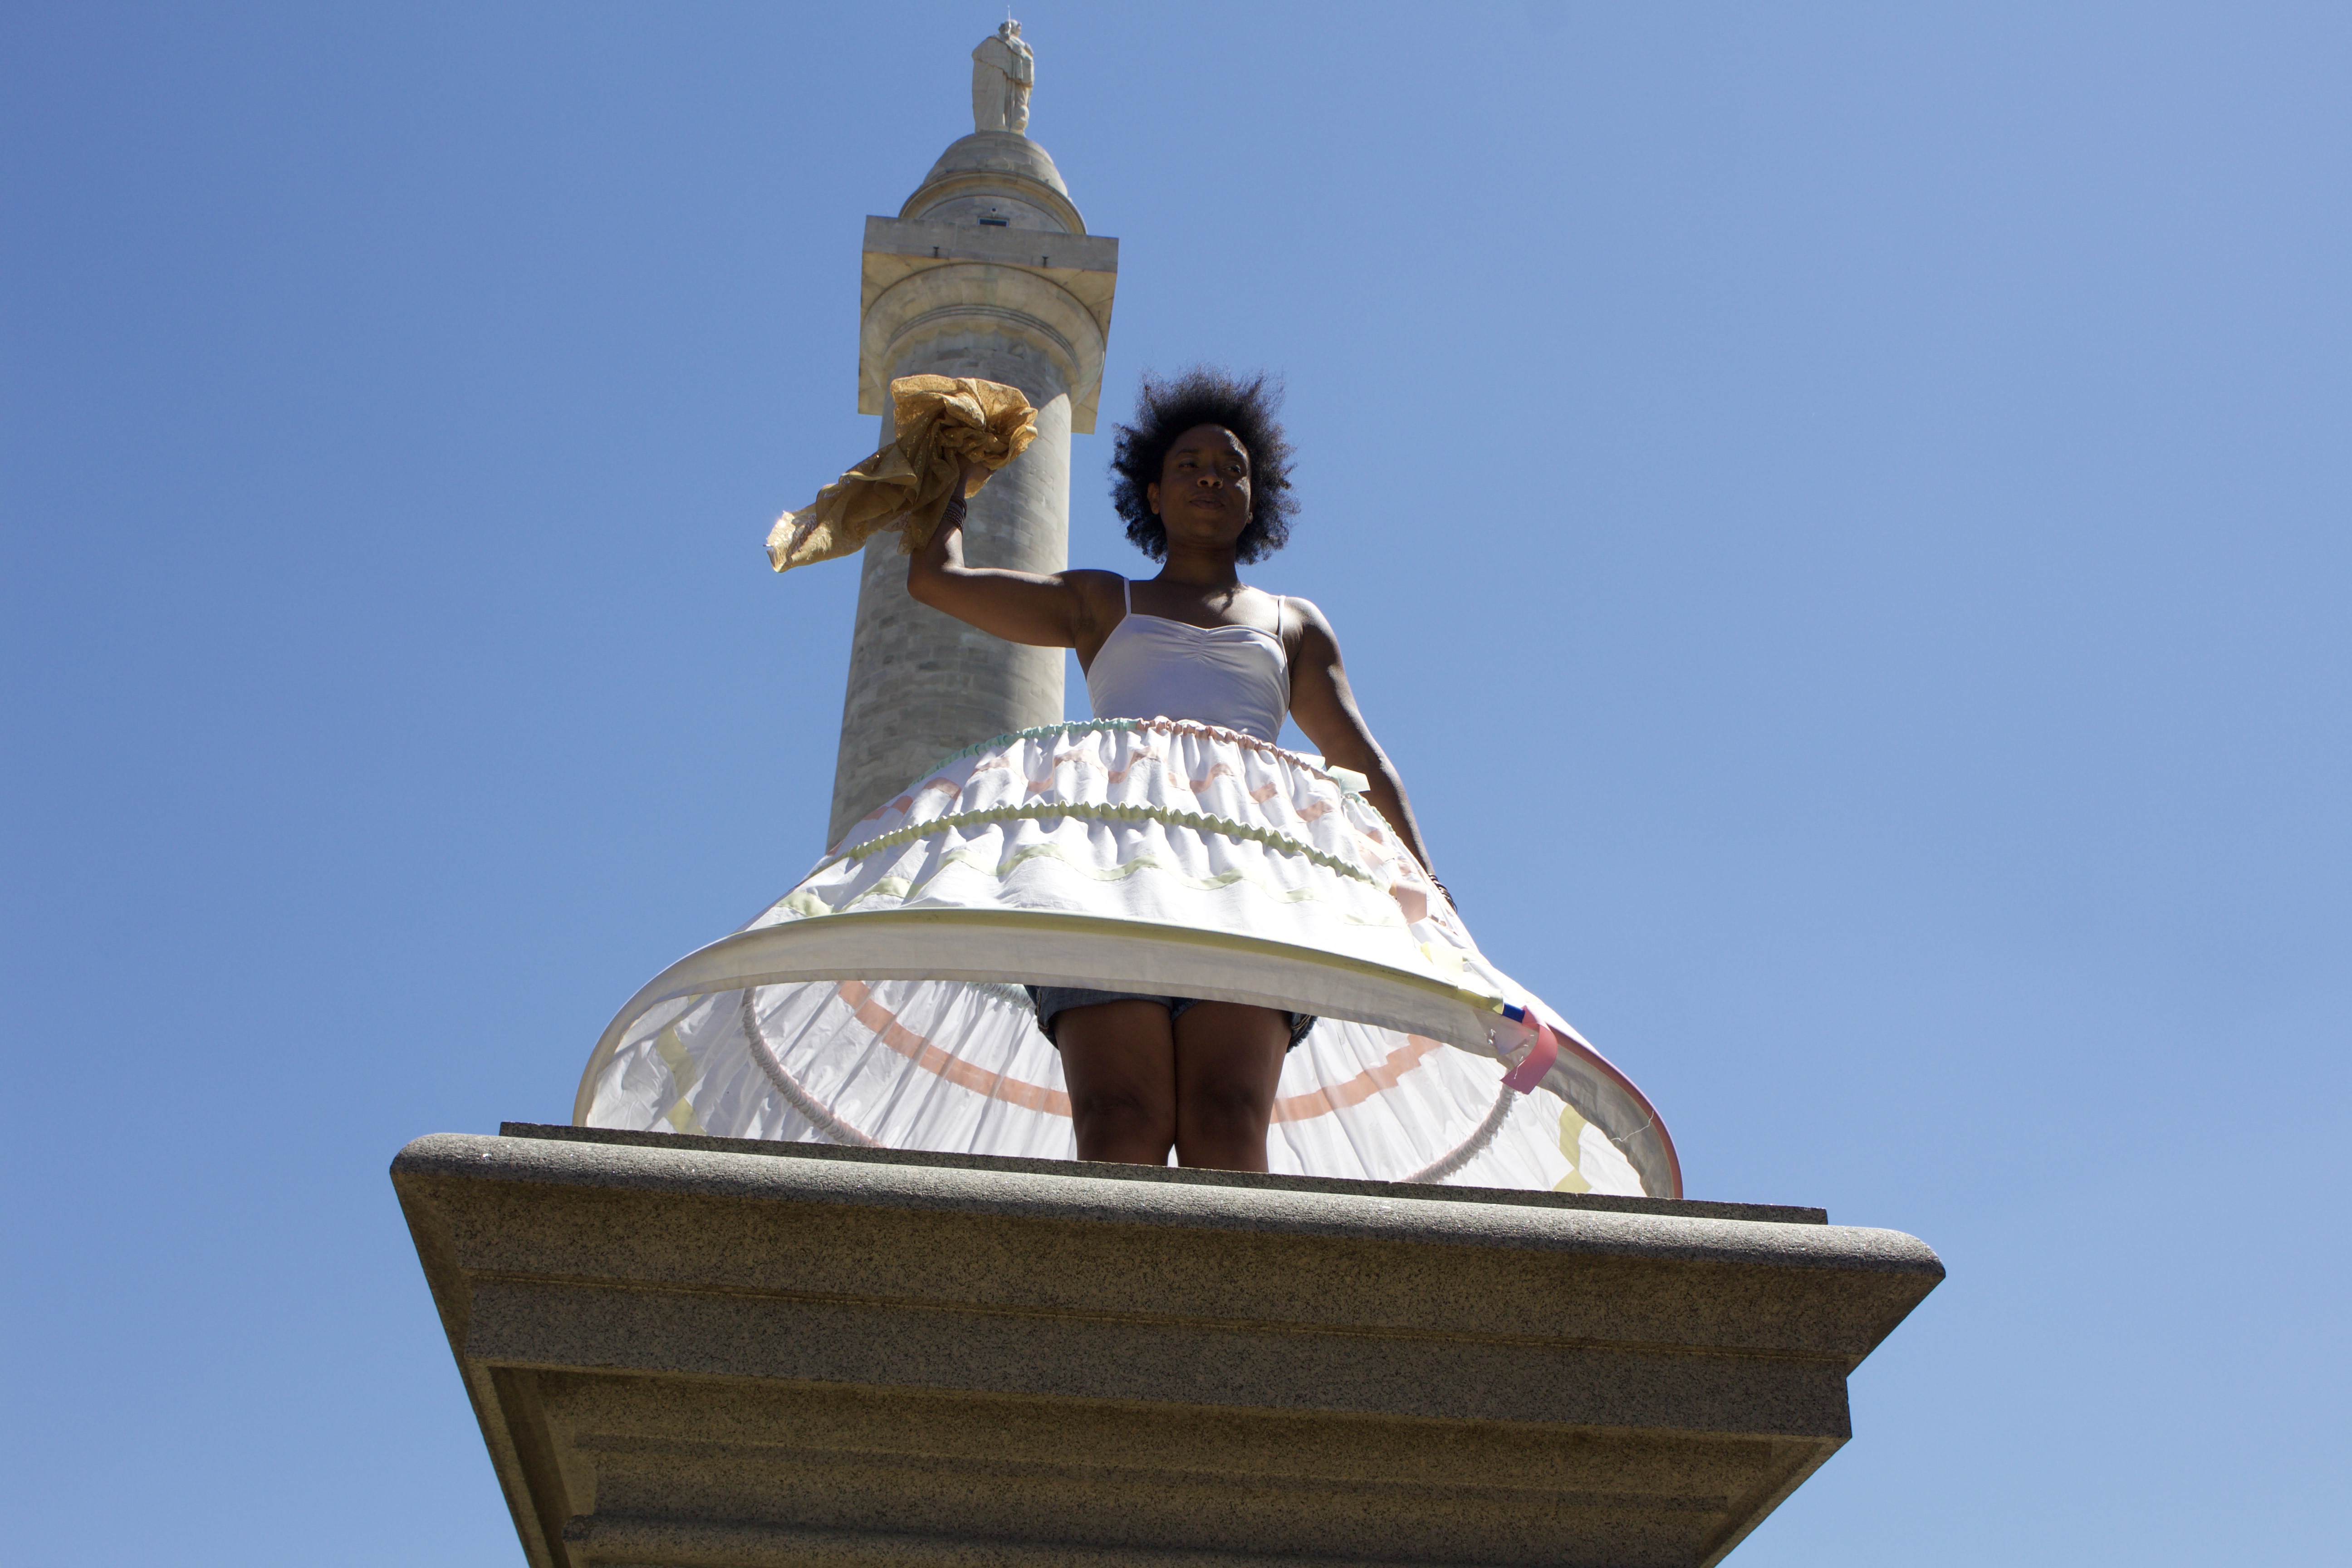 Ada Pinkston. Landmarked Part Iii Empty Pedestals. Emerging Time Space Movements In An Attempt To Reach Internal Liberation To Find Her New Remembermemory. When She Was Forgotten. Public Performance, July 2018 (photo By Chris Chapa. Courtes